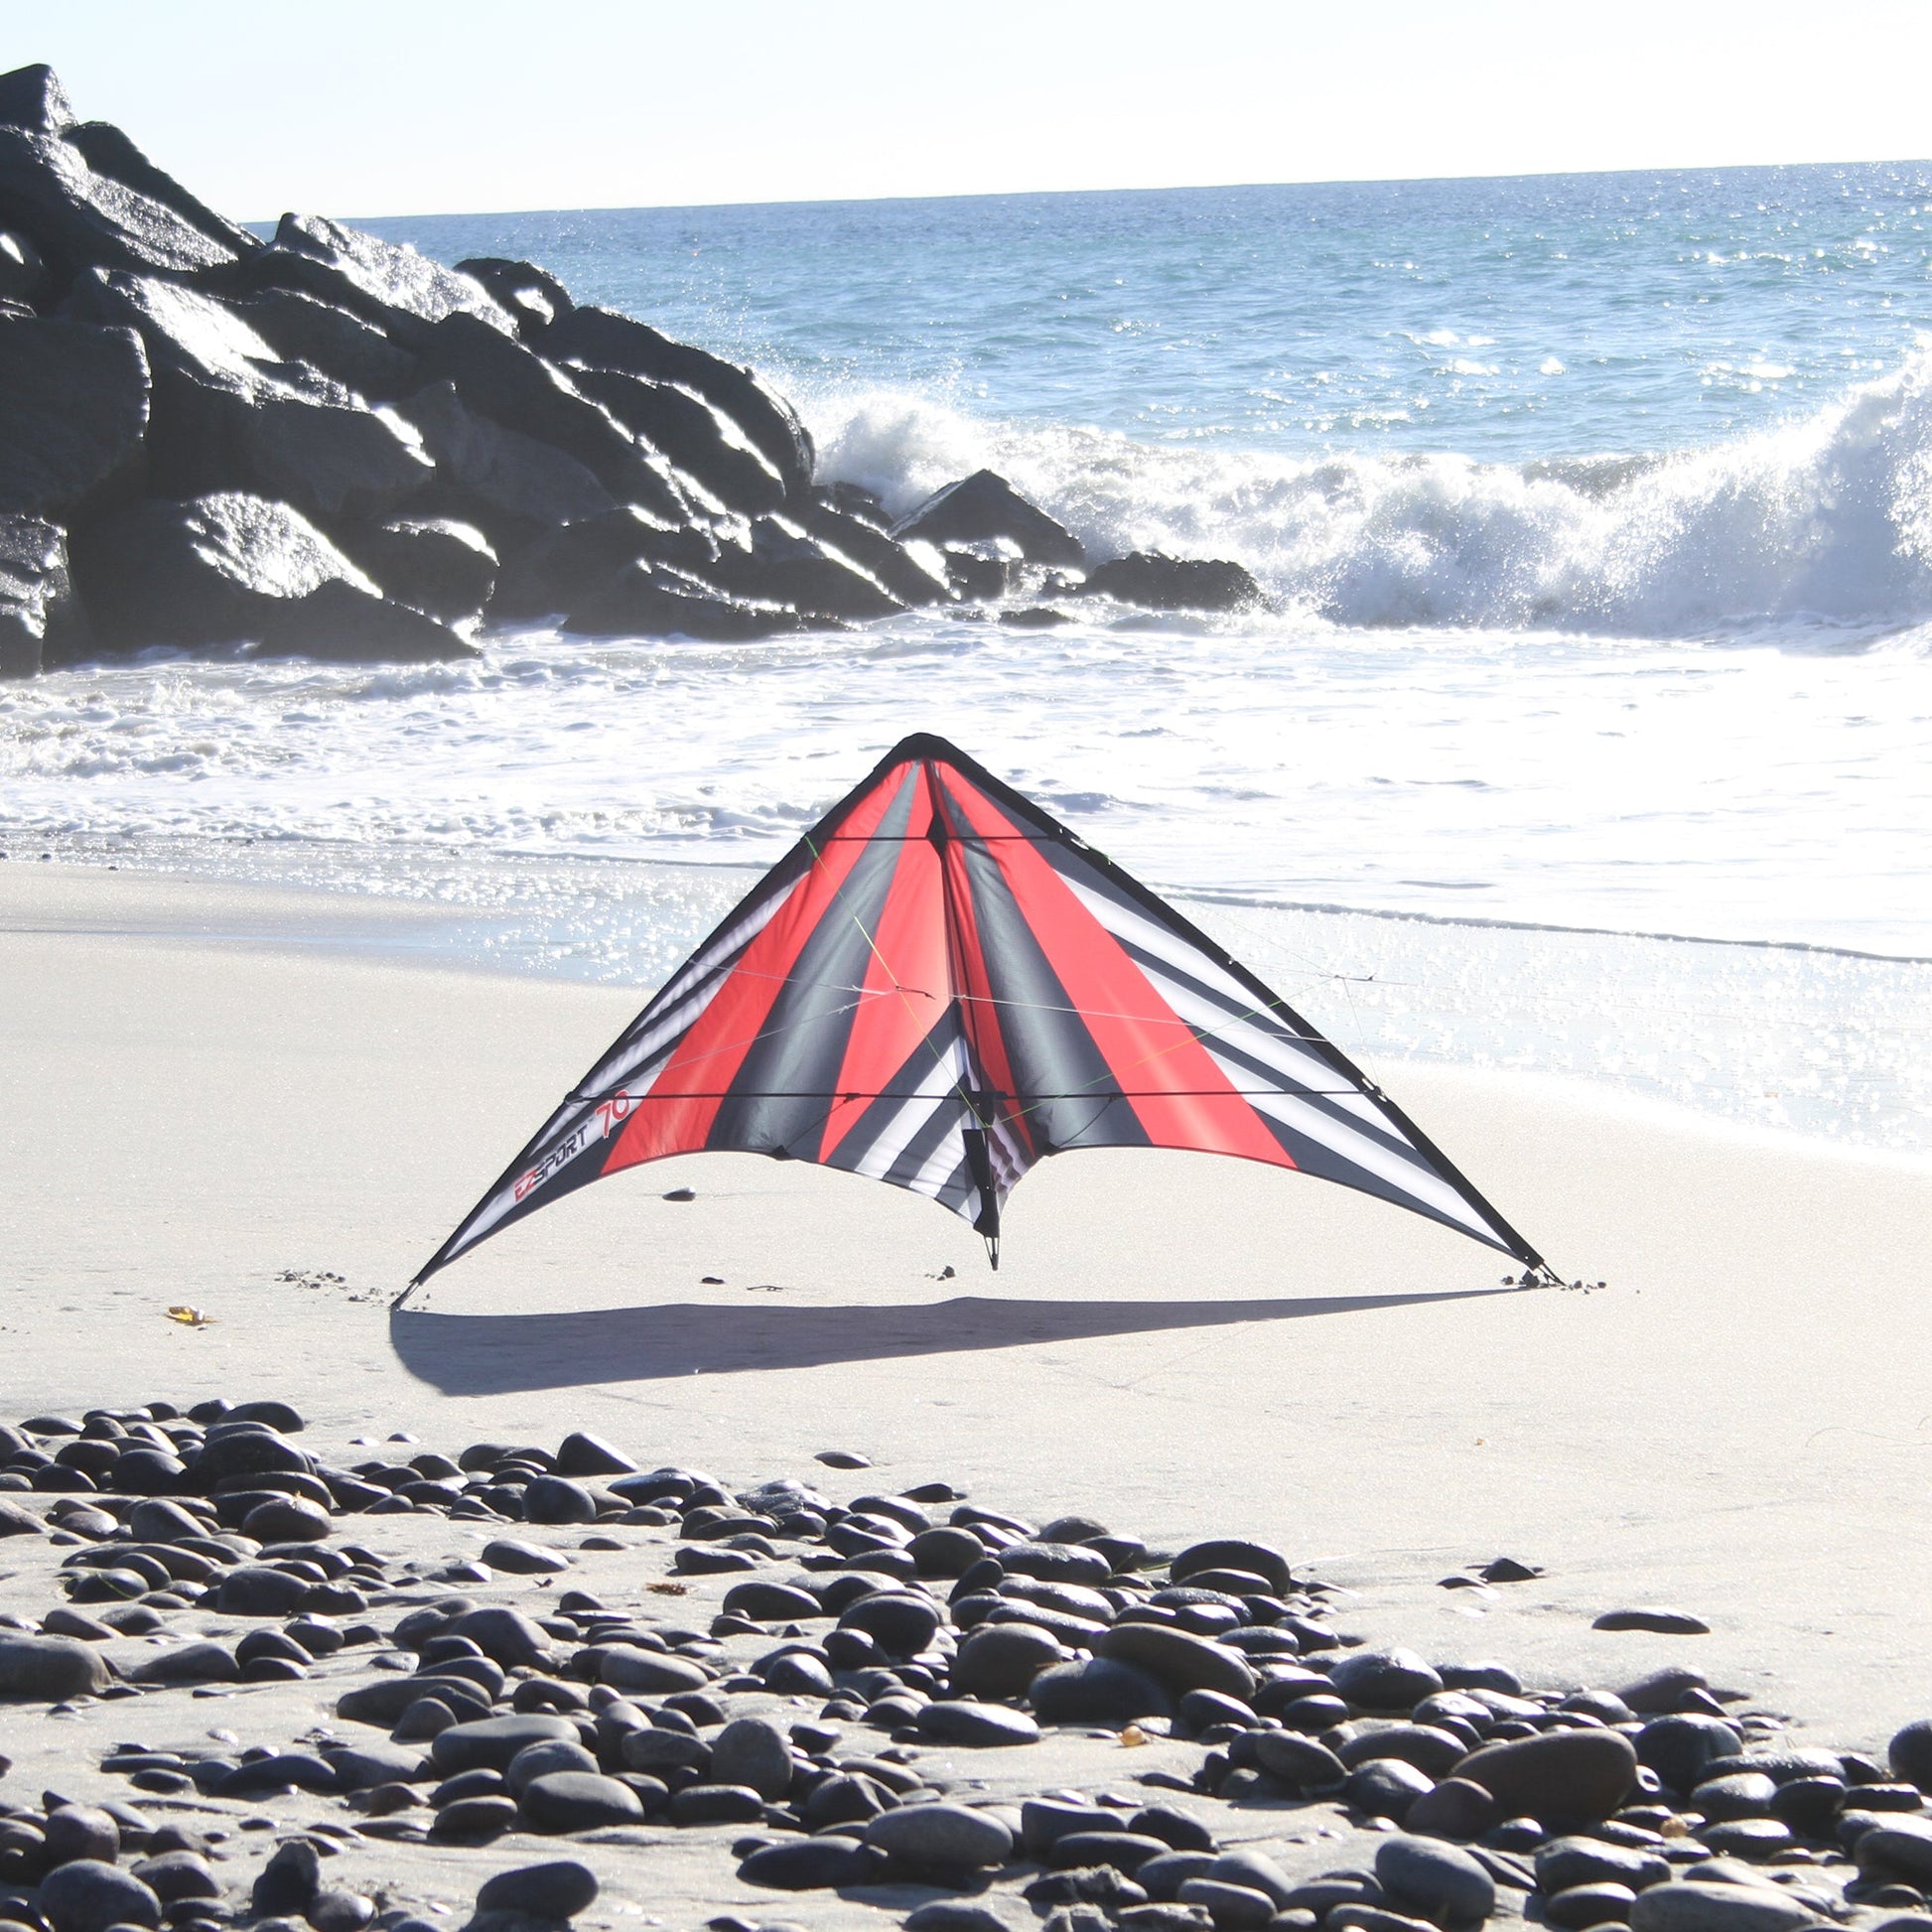 WindNSun NK93 + EZ Sport 70 Hex Dual Control Stunt Sport Kite Bundle in Red photo of product in use